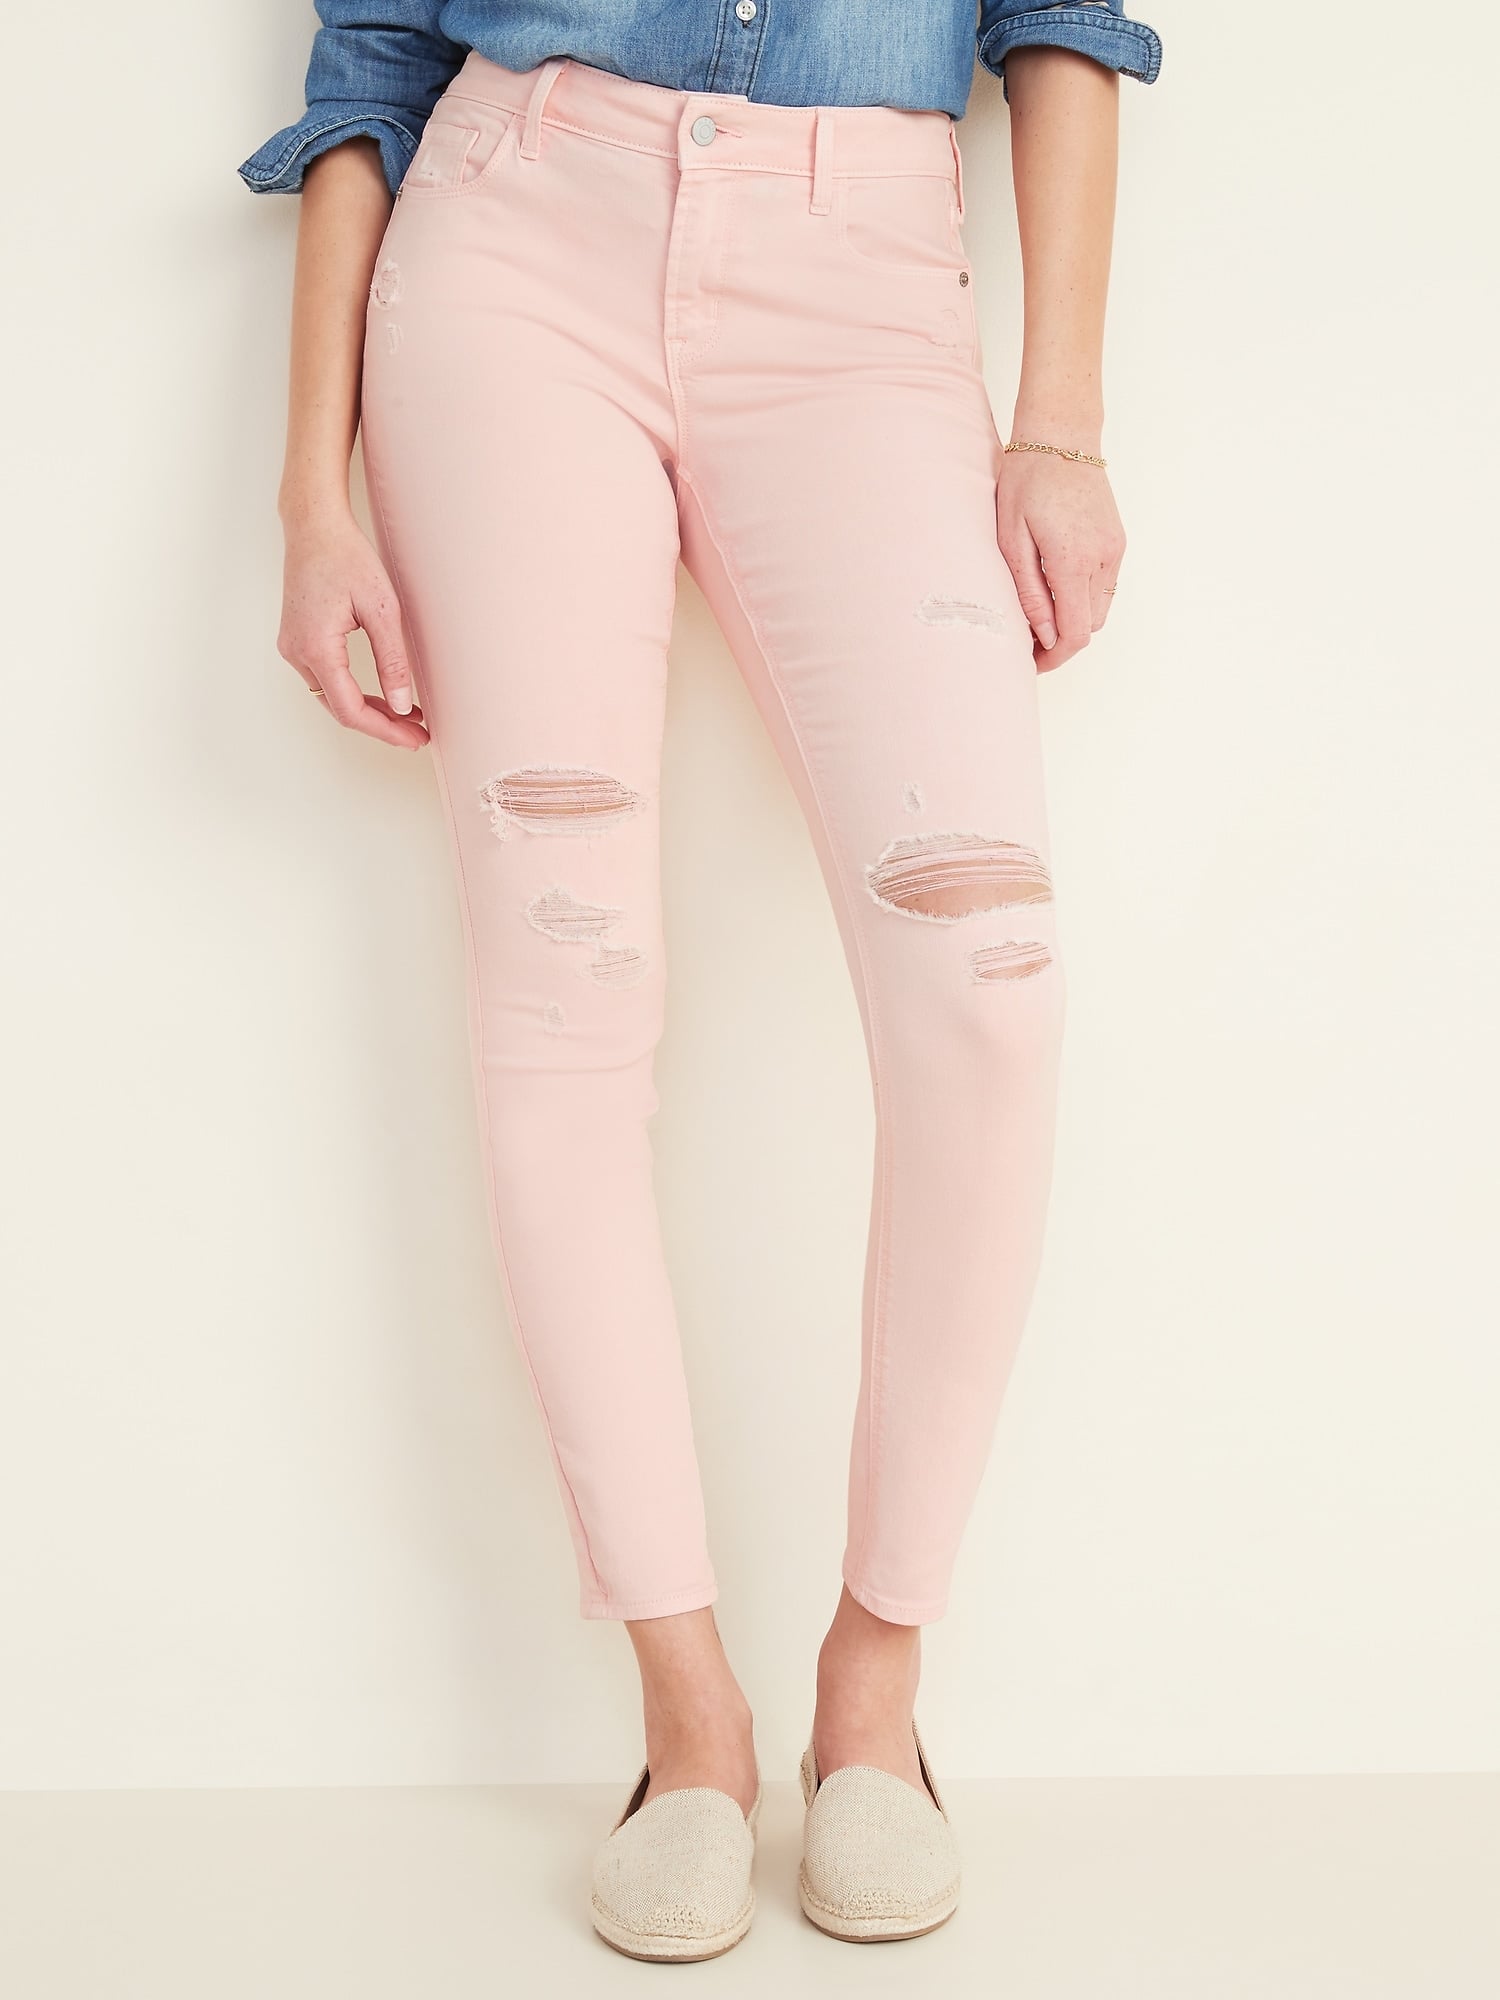 distressed colored jeans